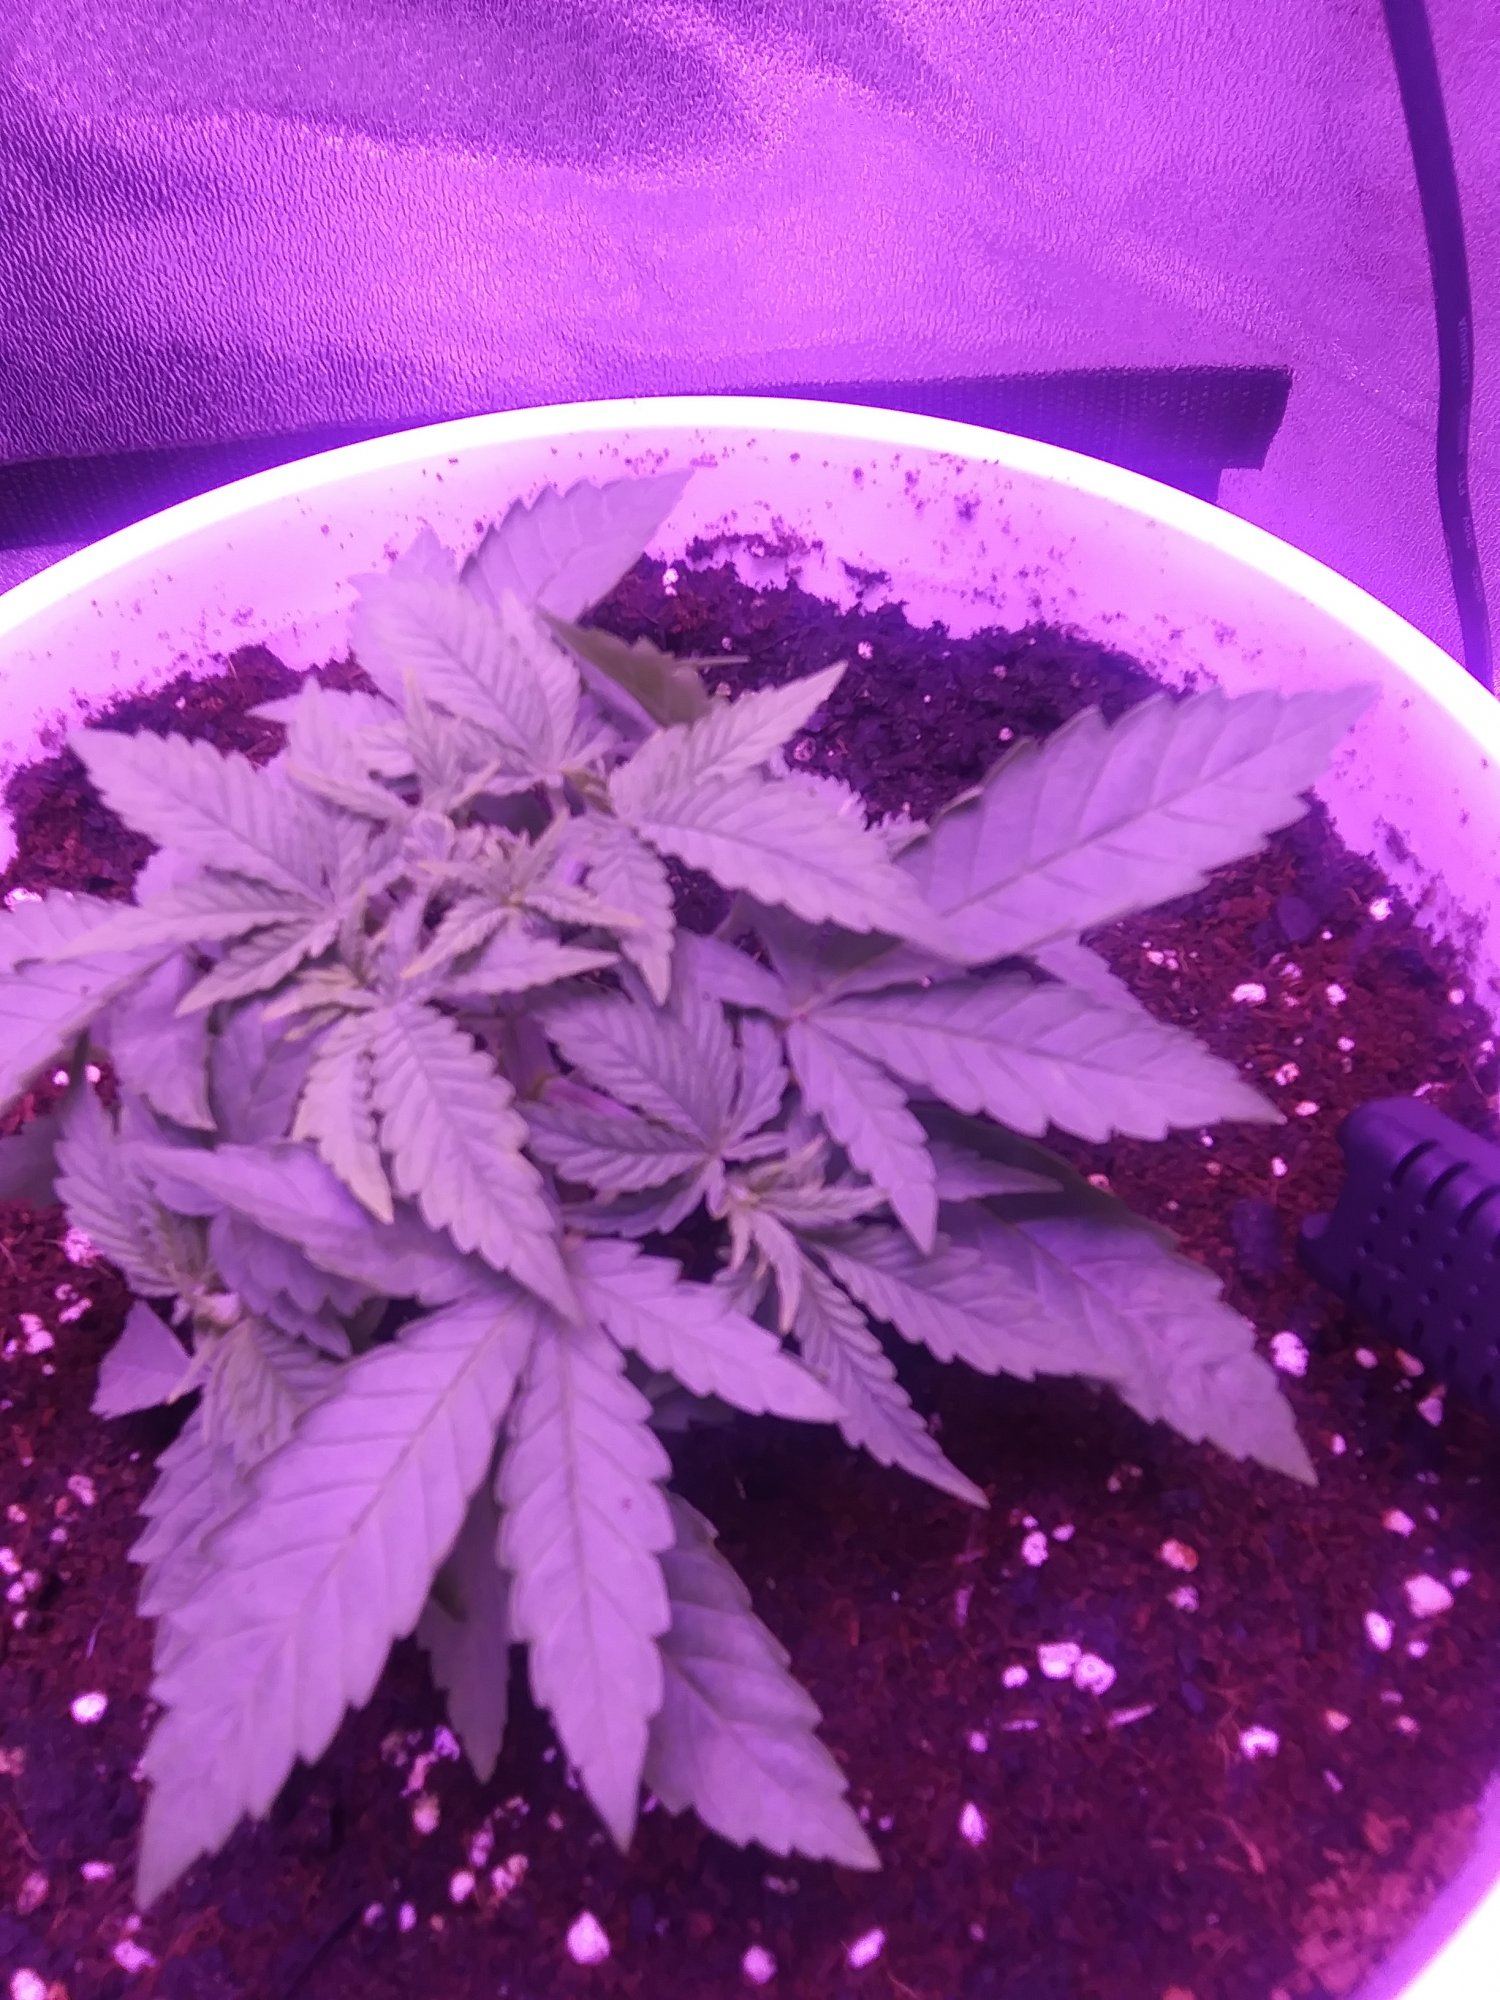 Plant is around 3 weeks old and its newer growth is slightly yellow 2